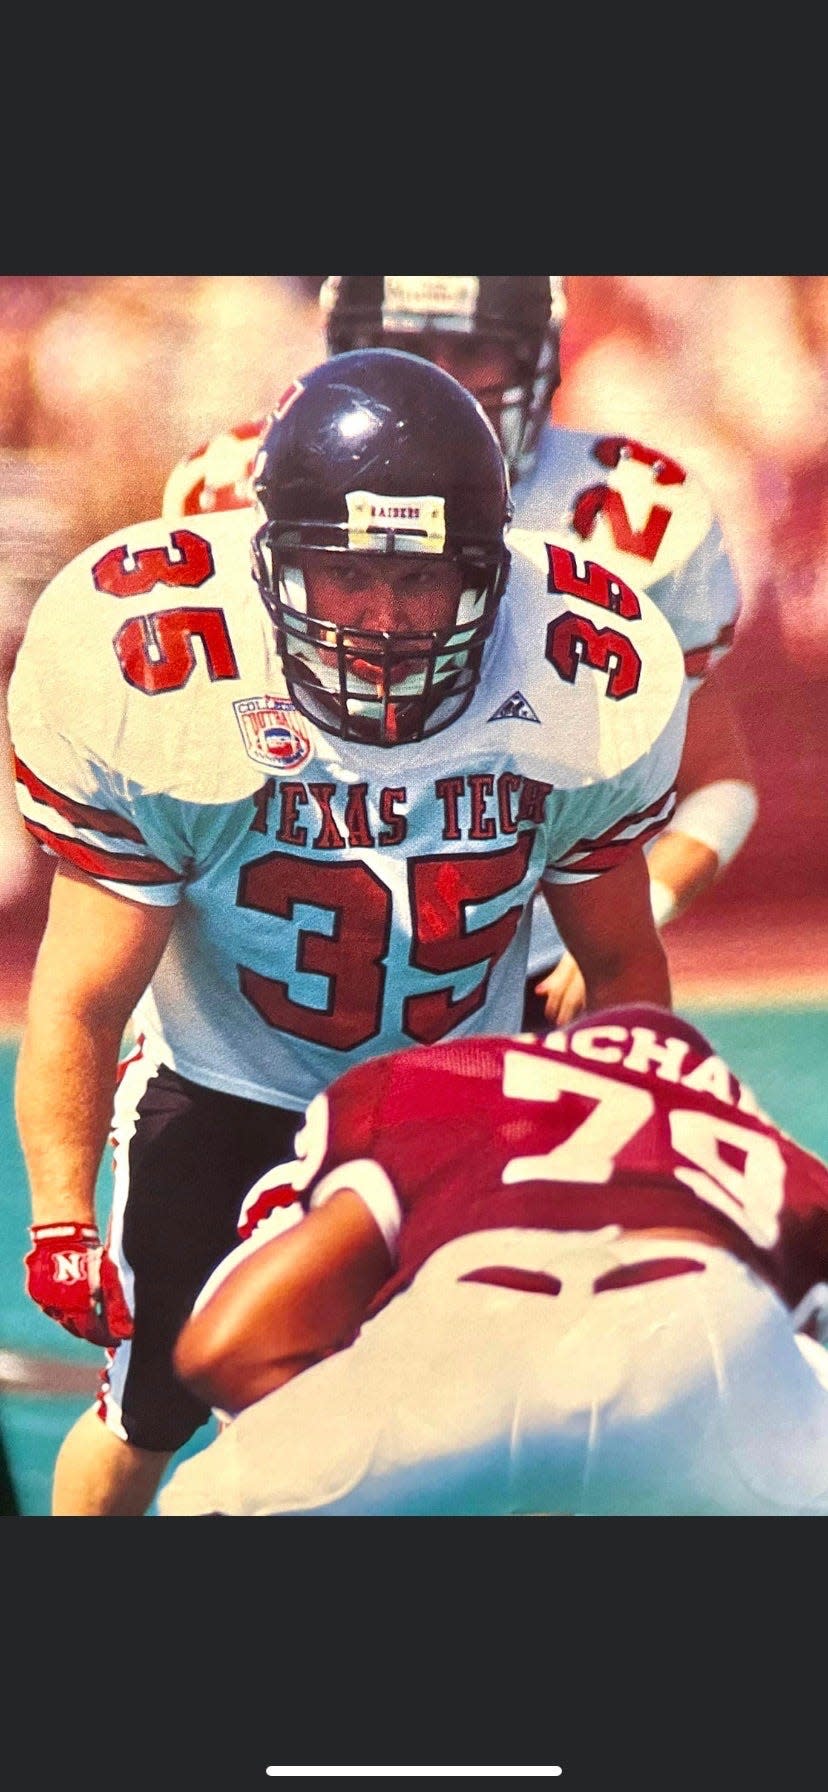 Zach Thomas during his Texas Tech playing days.